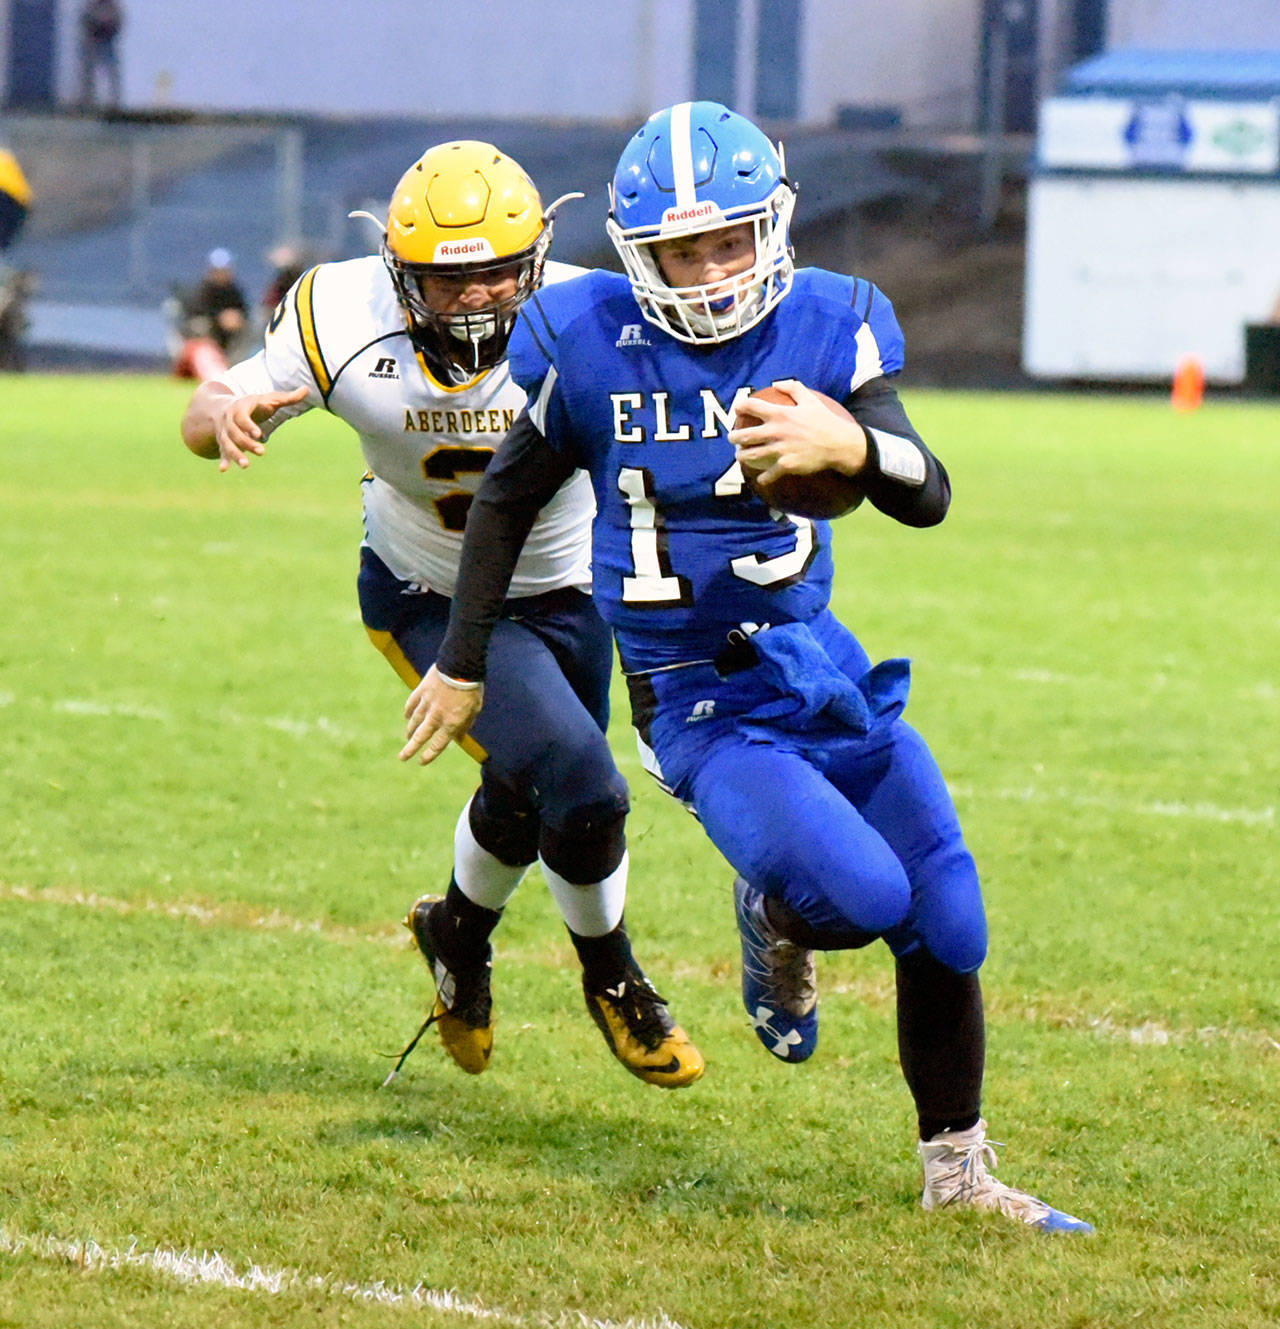 Elma quarterback Cody Vollan (13) sprints away from Aberdeen’s Dillen Espana during the Eagles’ 42-0 win last week. Elma hosts Castle Rock while Aberdeen welcomes Kelso to Stewart Field on Friday. Both games are scheduled to start at 7 p.m. (Photo by Sue Michalak)